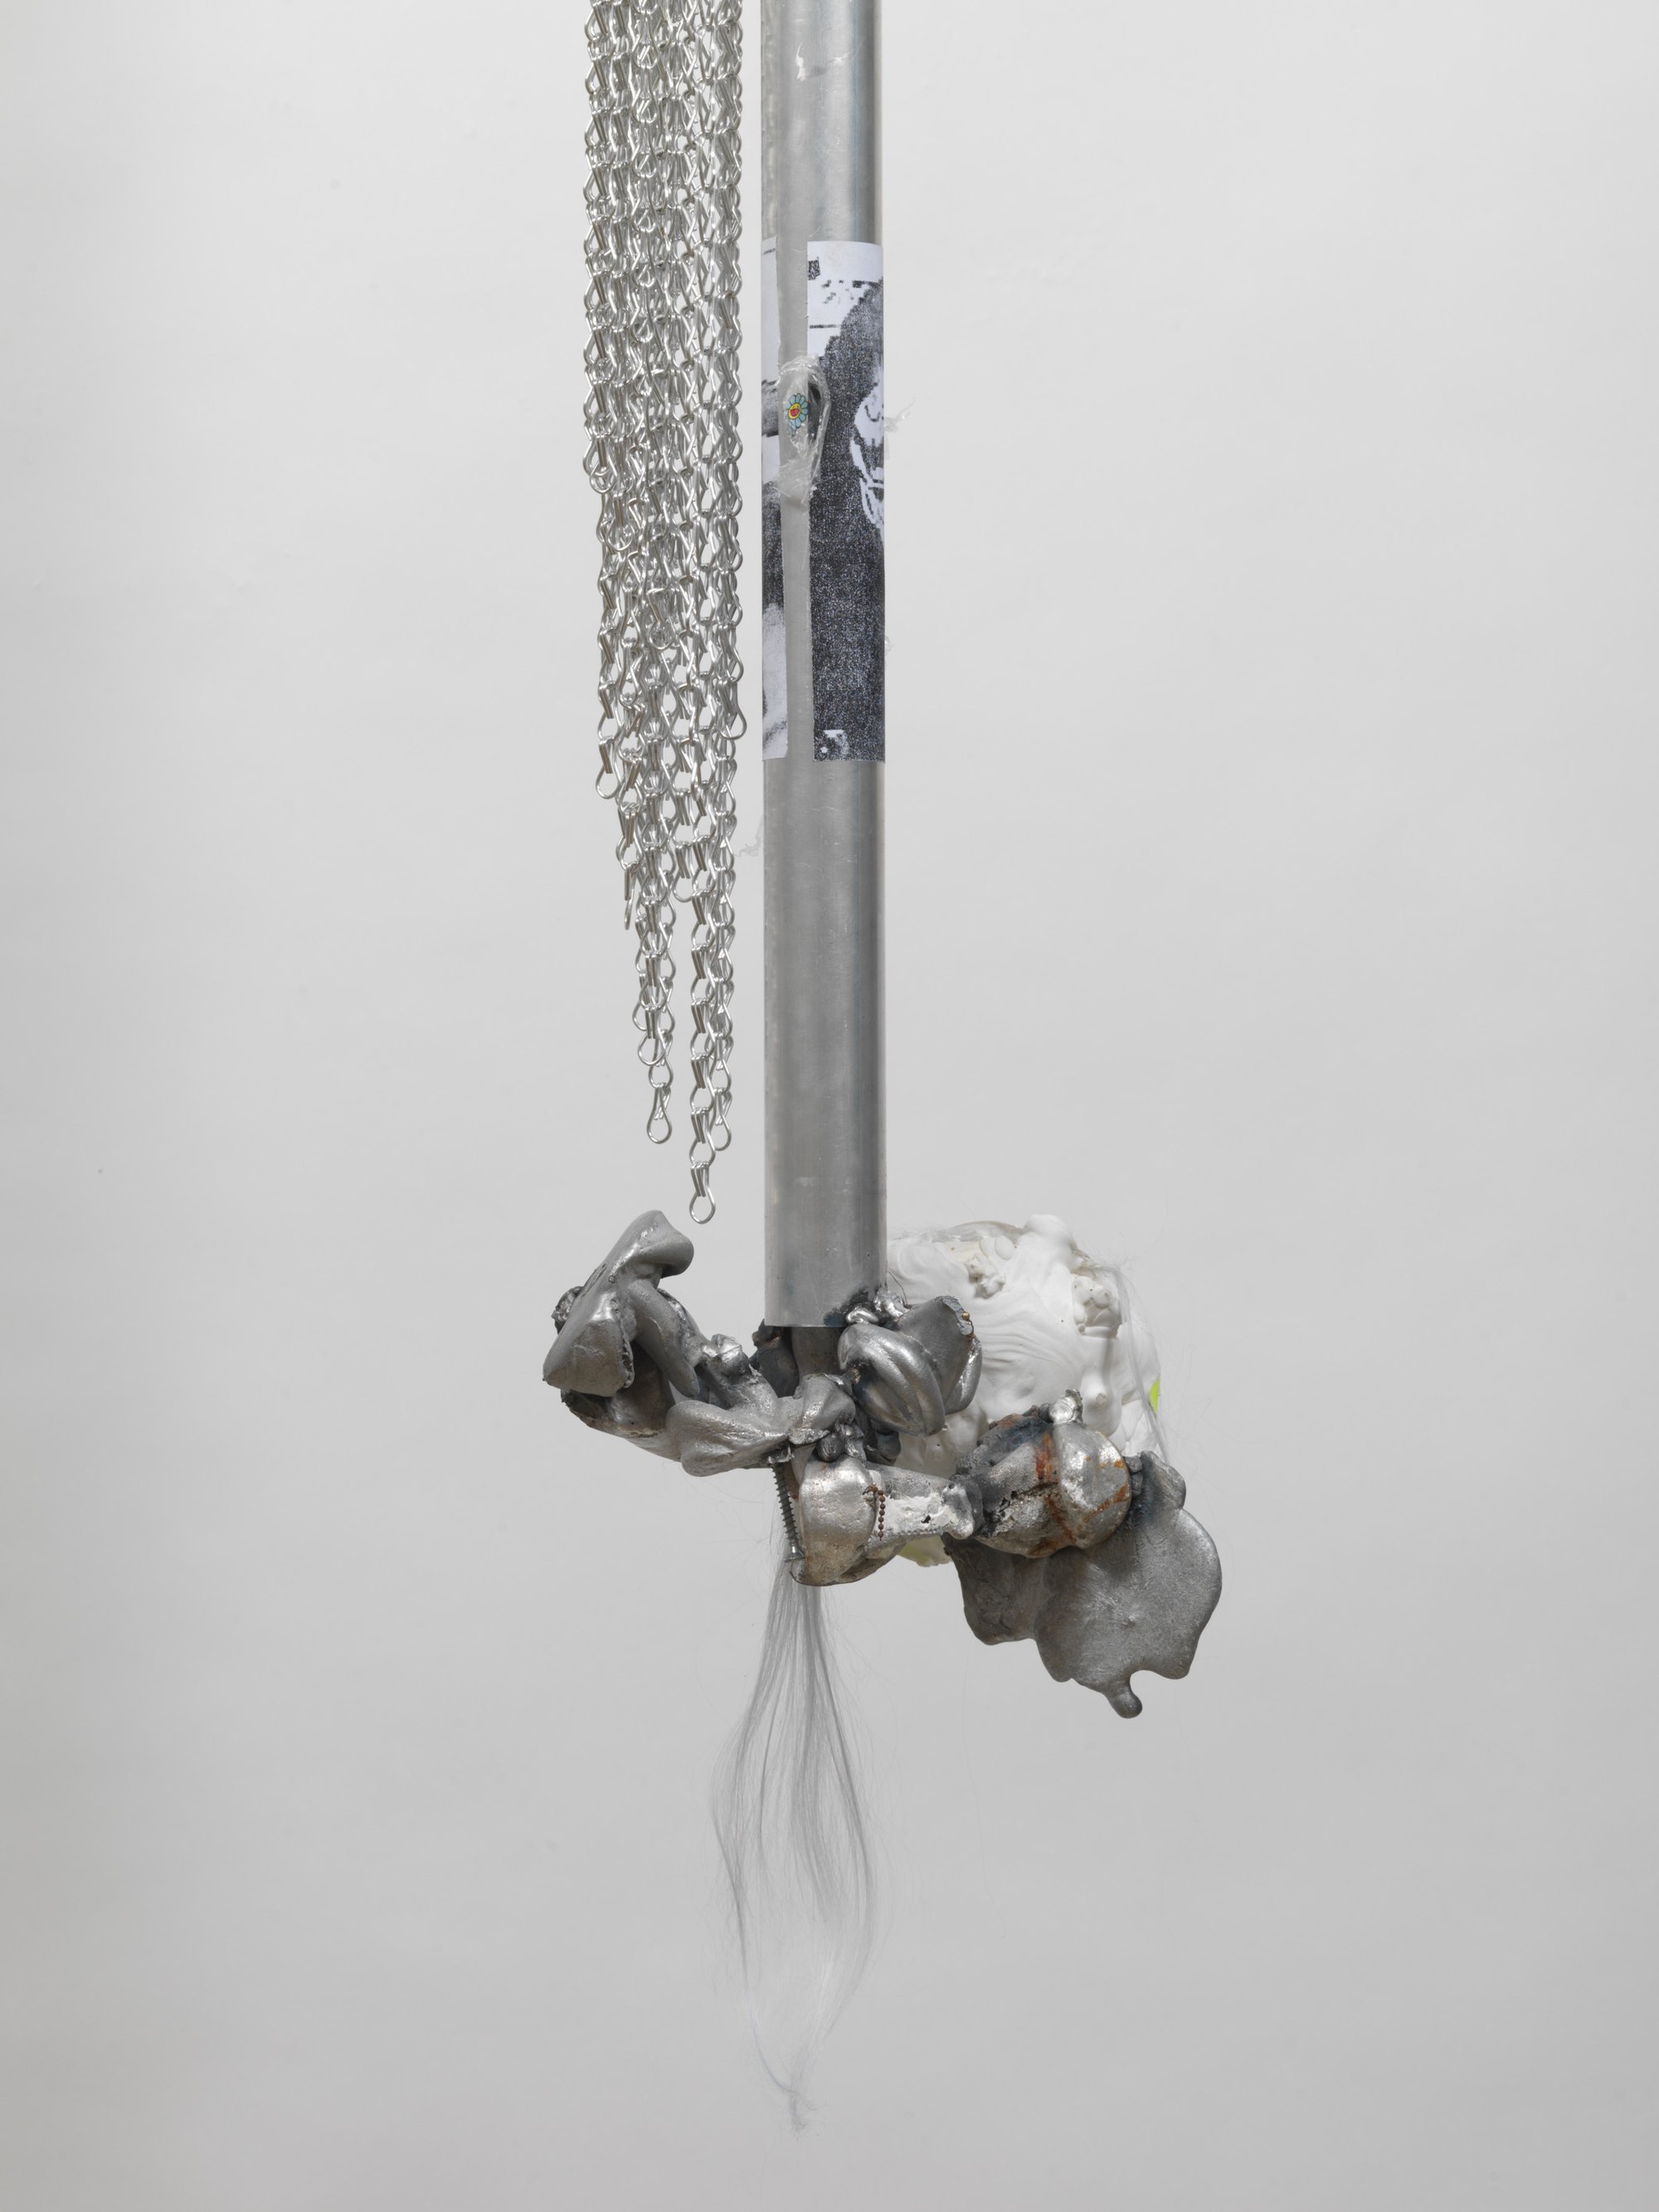 David Douard, for thee Secretion’ 3, detail, aluminum, plastic beads, plaster, paper, synthetic hair, 280 x 30 x 20 cm, 2021